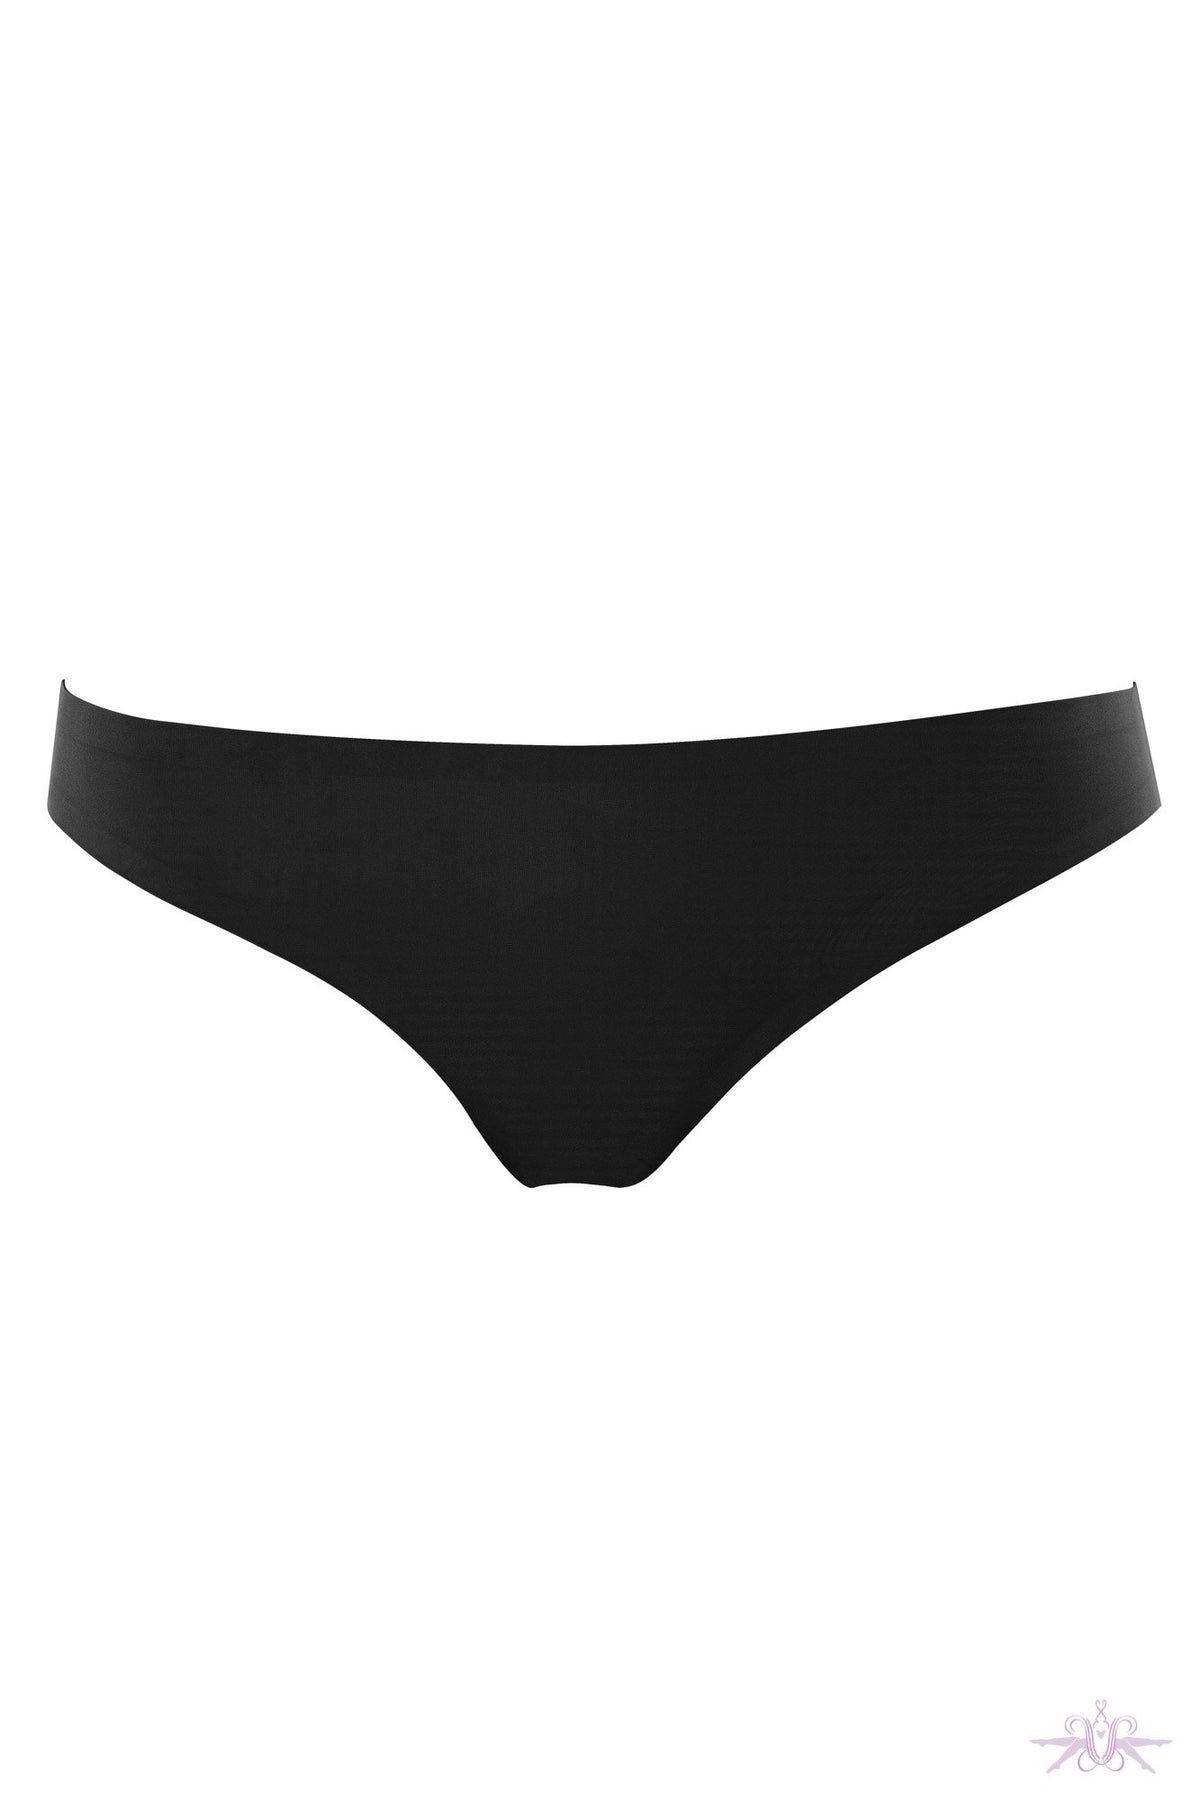 Maison Close Tapage Nocturne Black Open Panty at the Hosiery Box Open ...